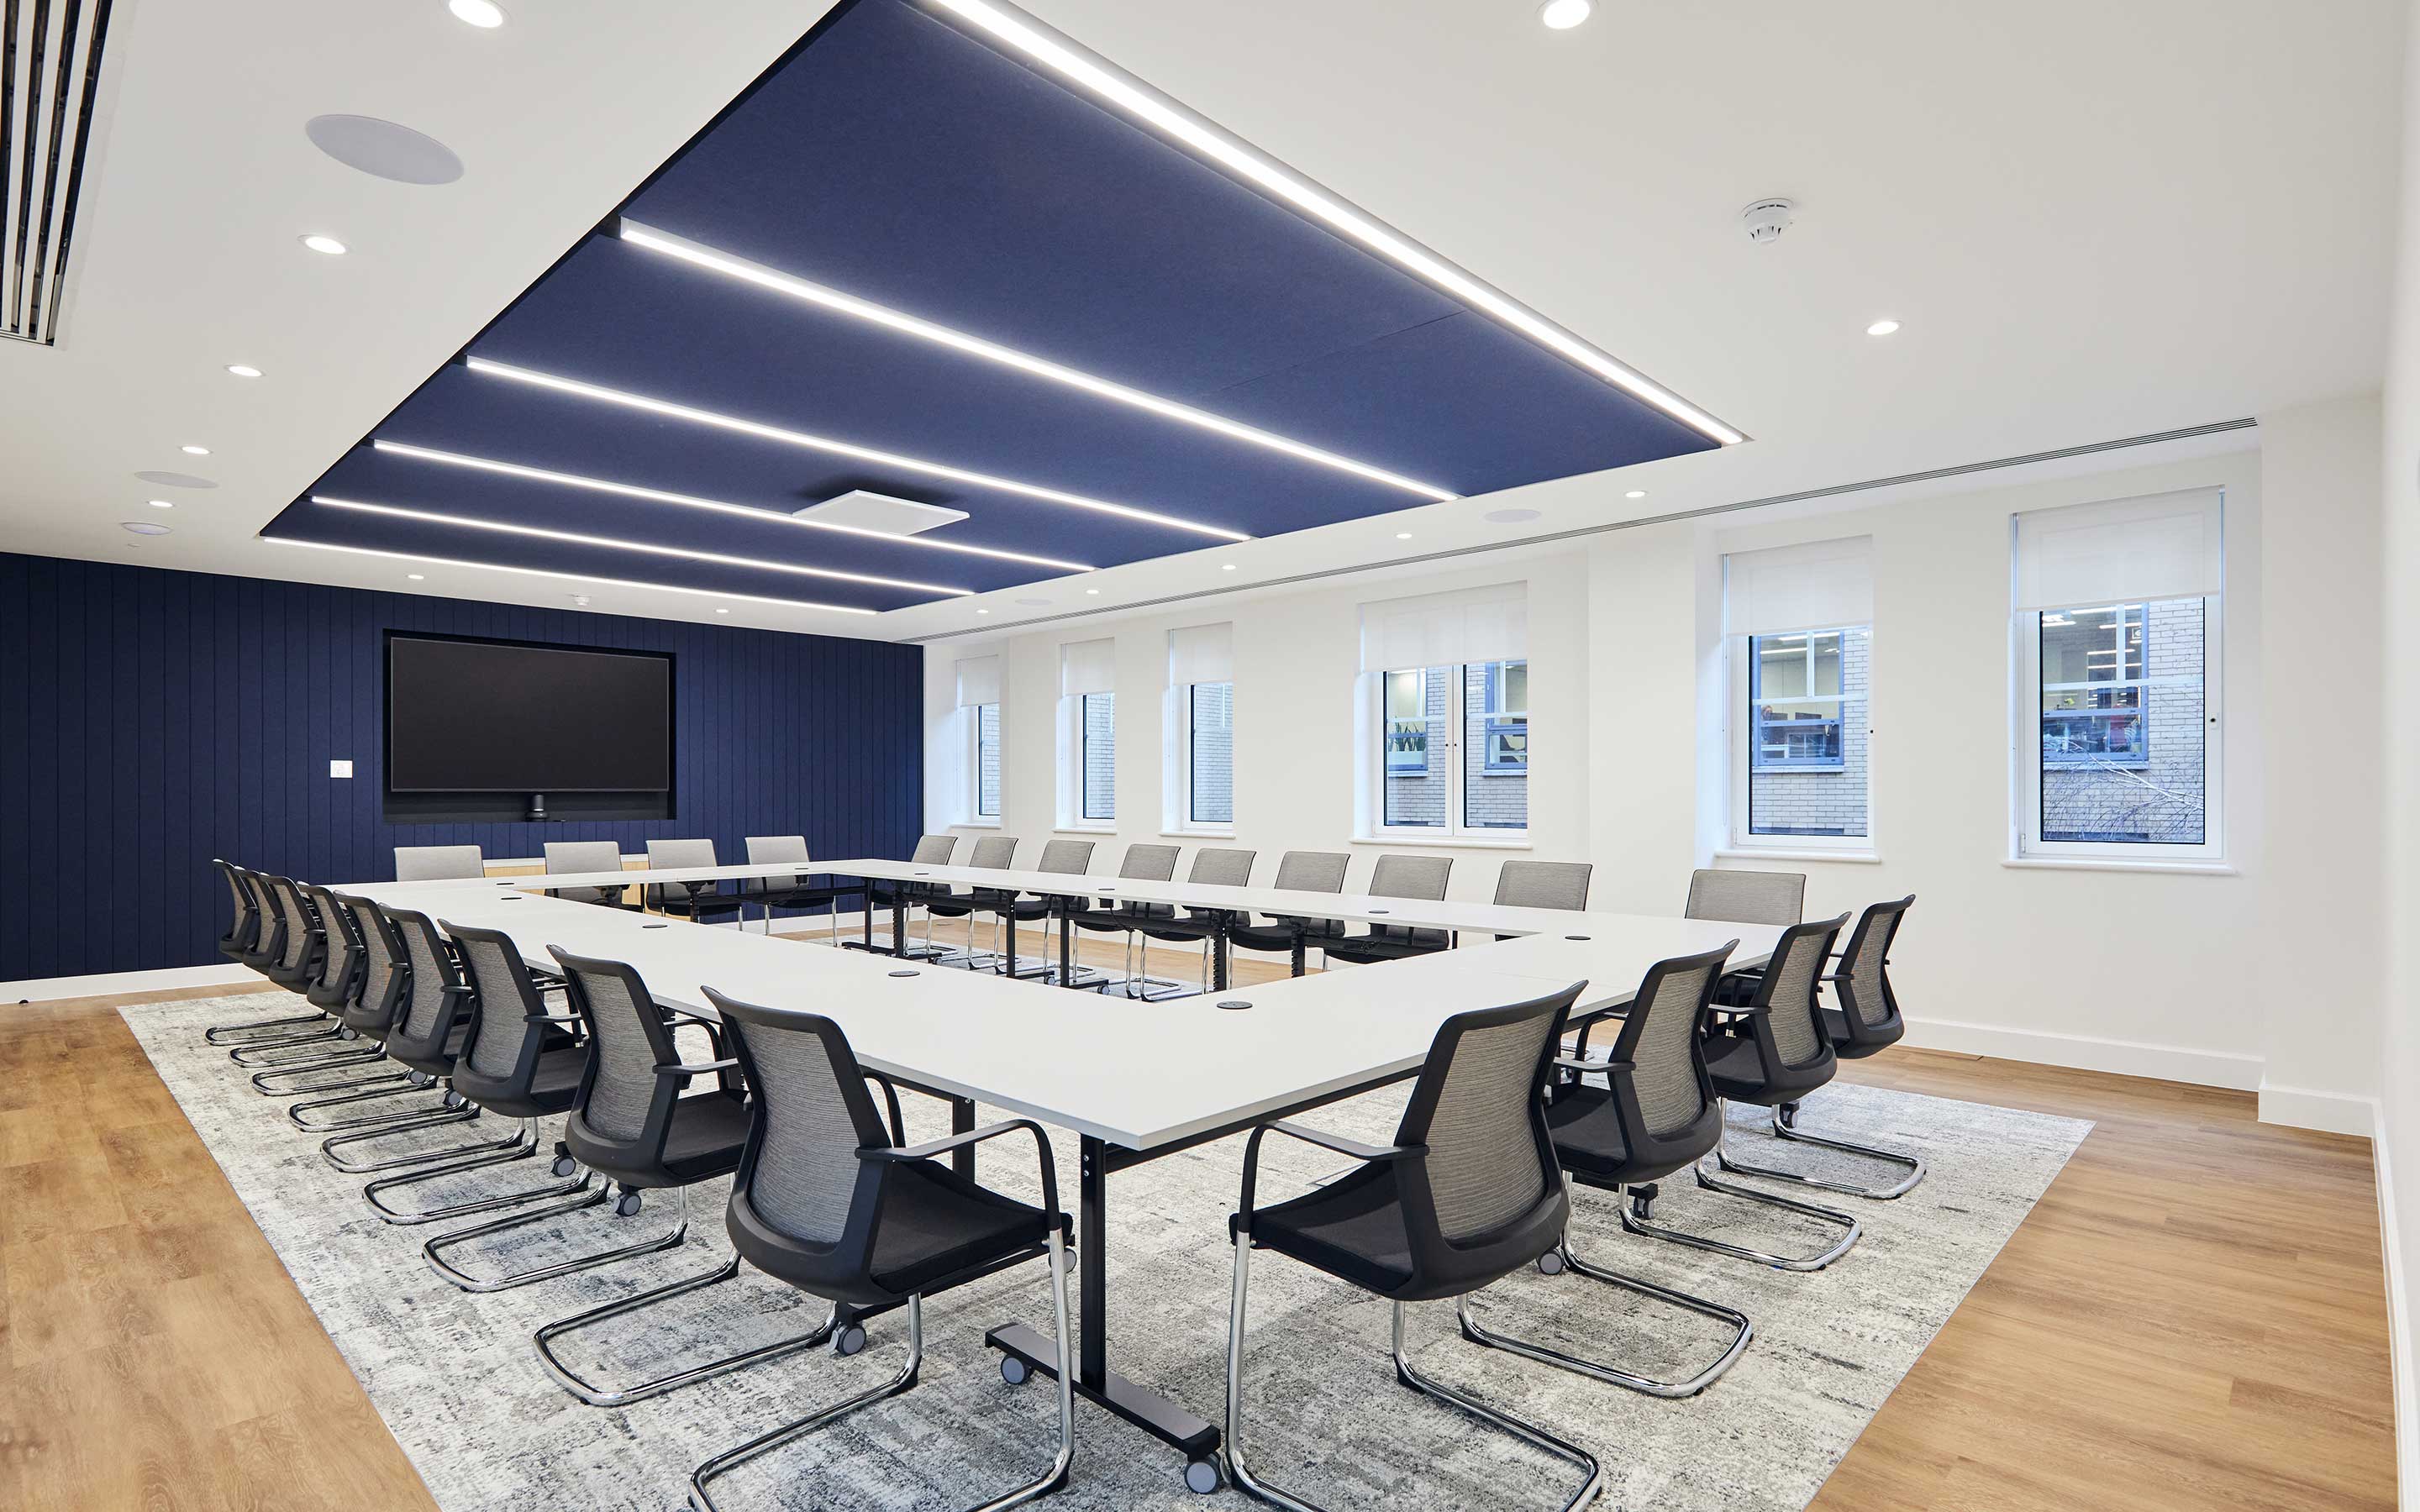 A large boardroom with optimised acoustics, AV and lighting, characterising a sleek and modern office interior design